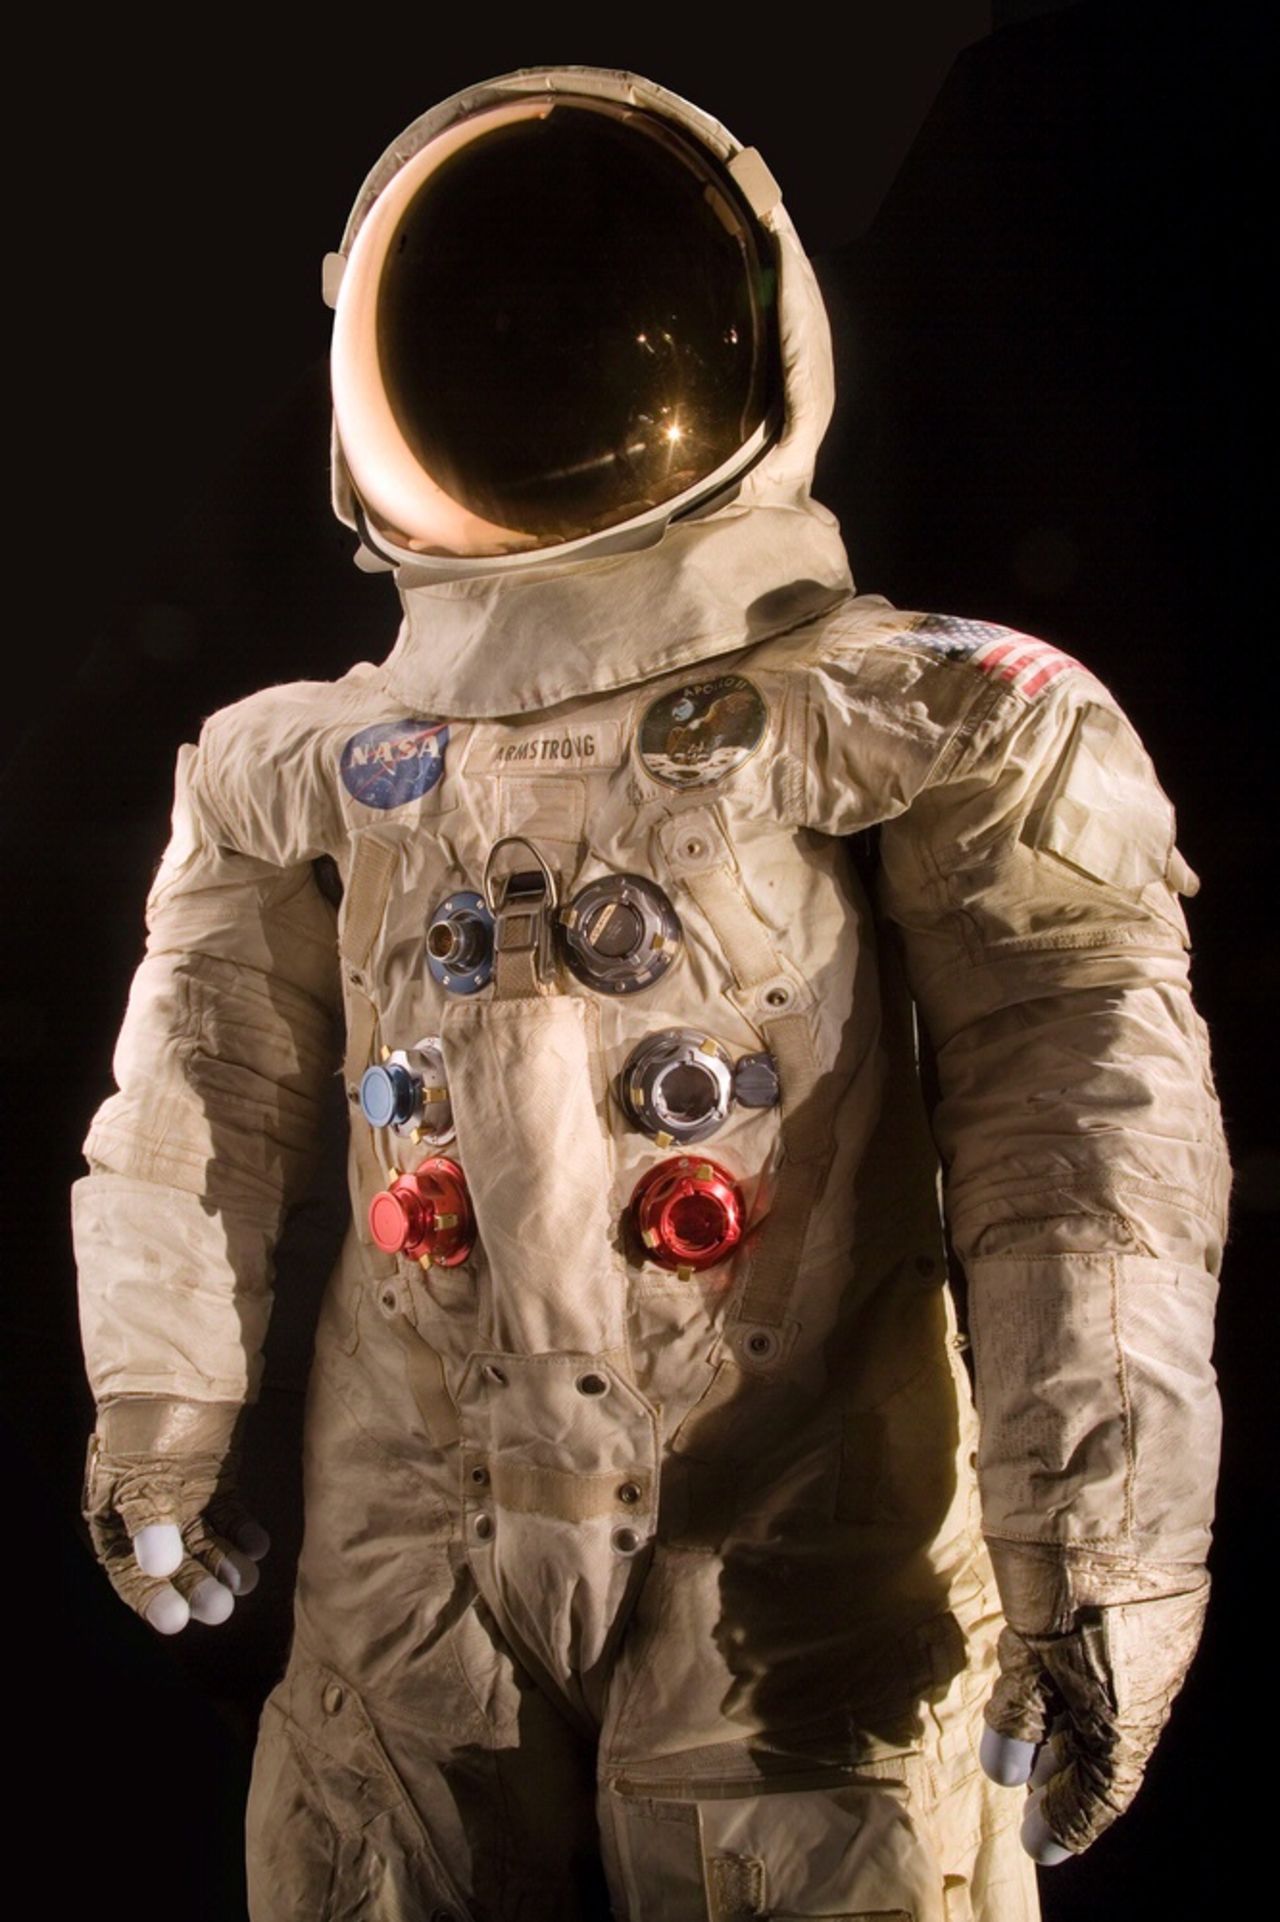 This spacesuit was worn by astronaut Neil Armstrong, commander of the Apollo 11 mission, which landed the first man on the moon on July 20, 1969.